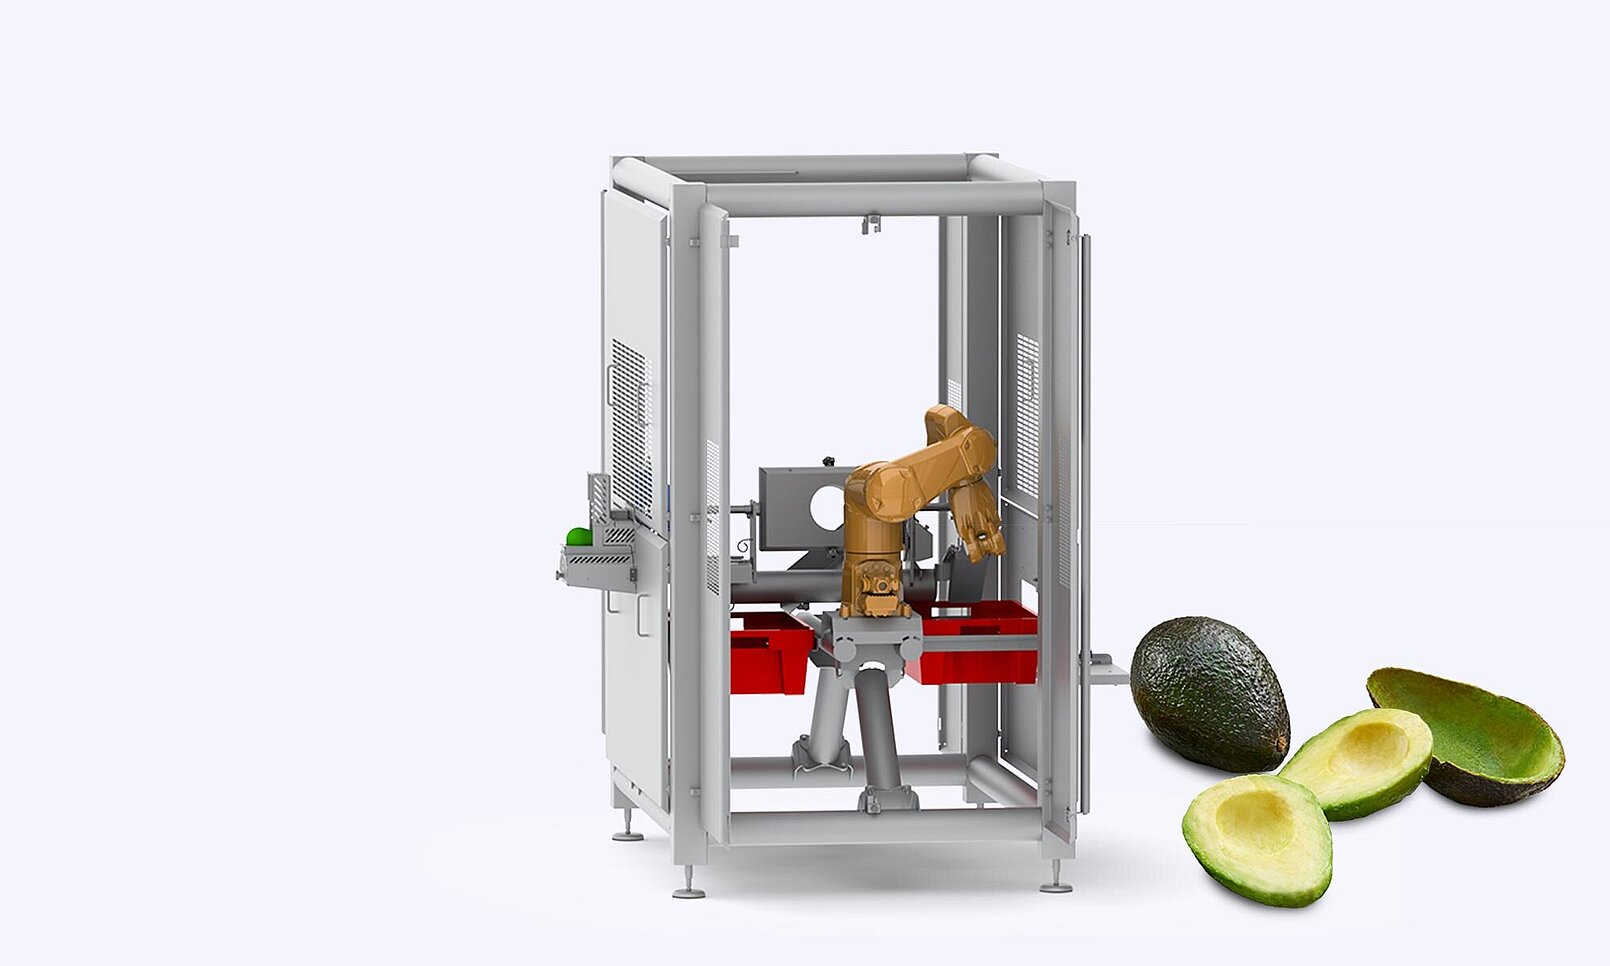 Research project for the processing of avocados with the aid of robots